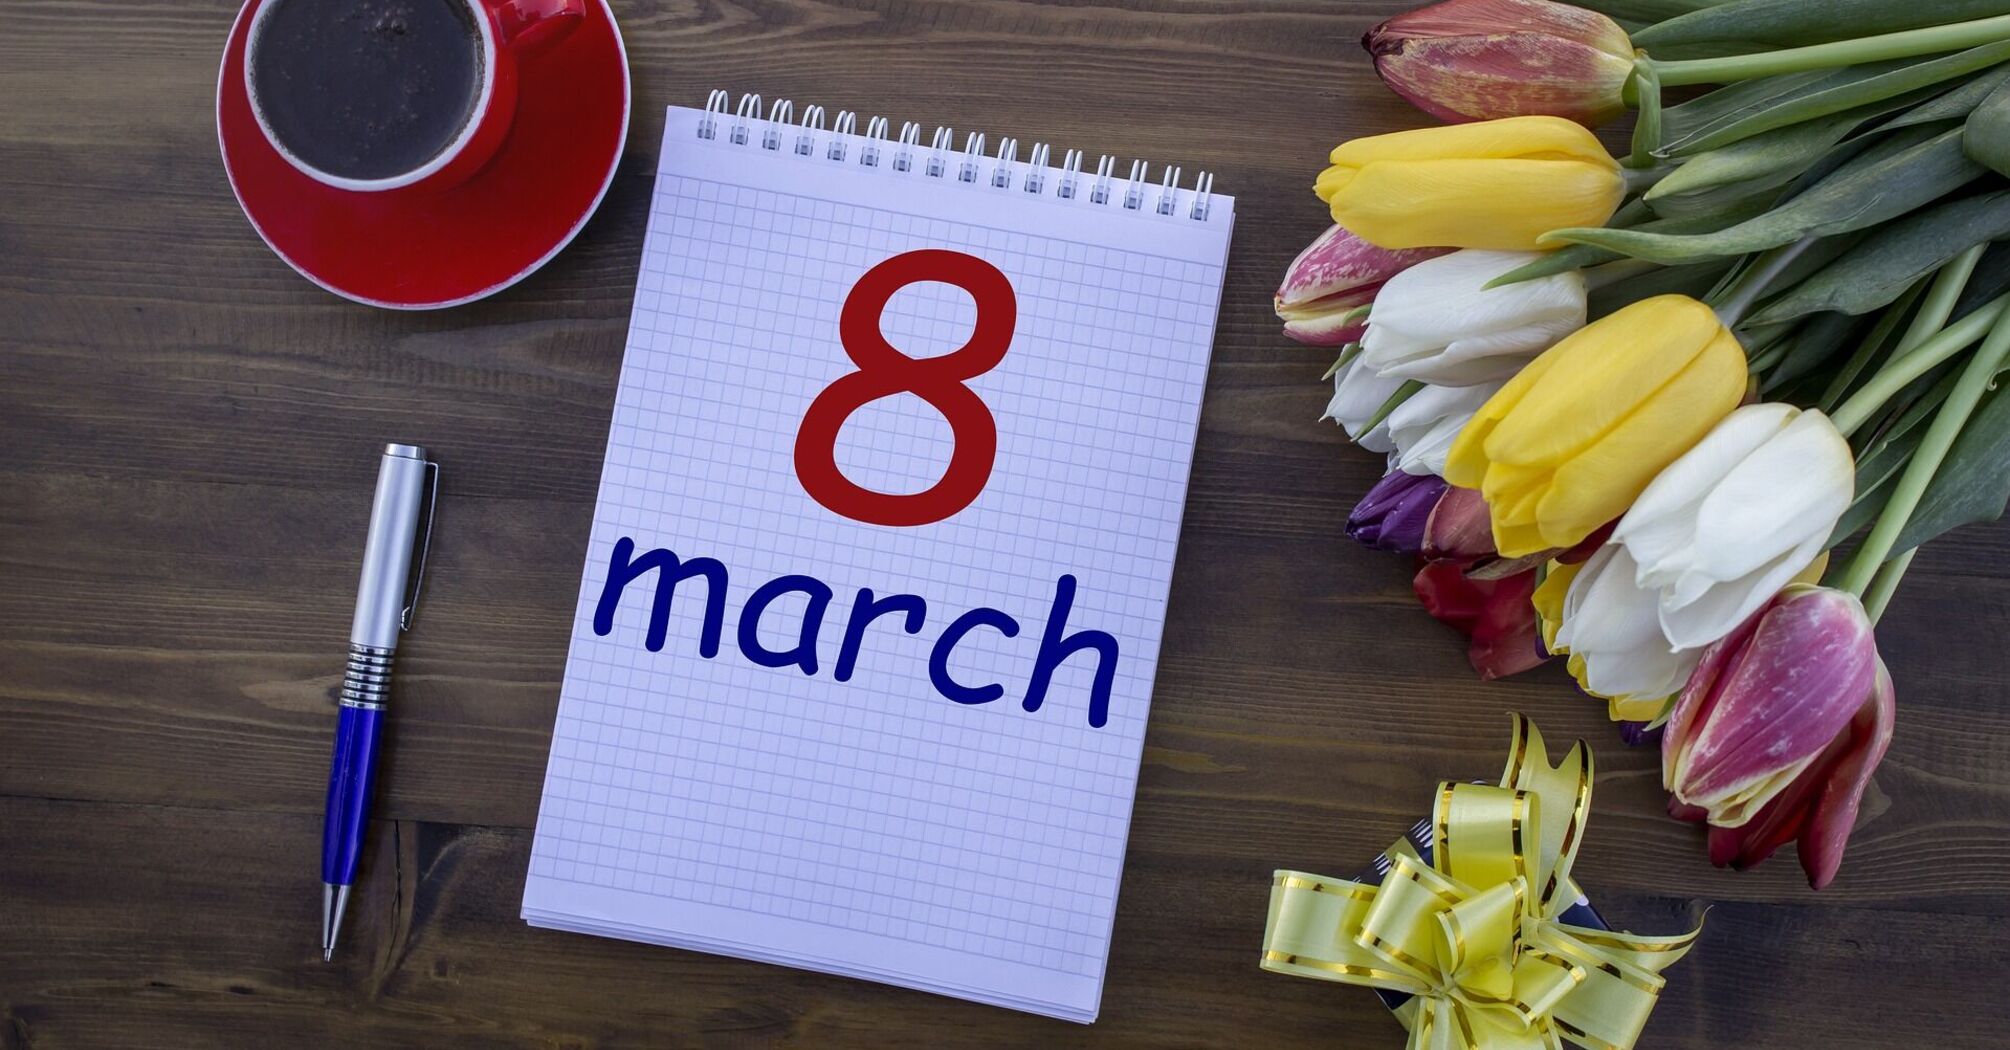 A notebook with "8 March" written on it, a red cup of coffee, a pen, and a bouquet of colorful tulips on a wooden background